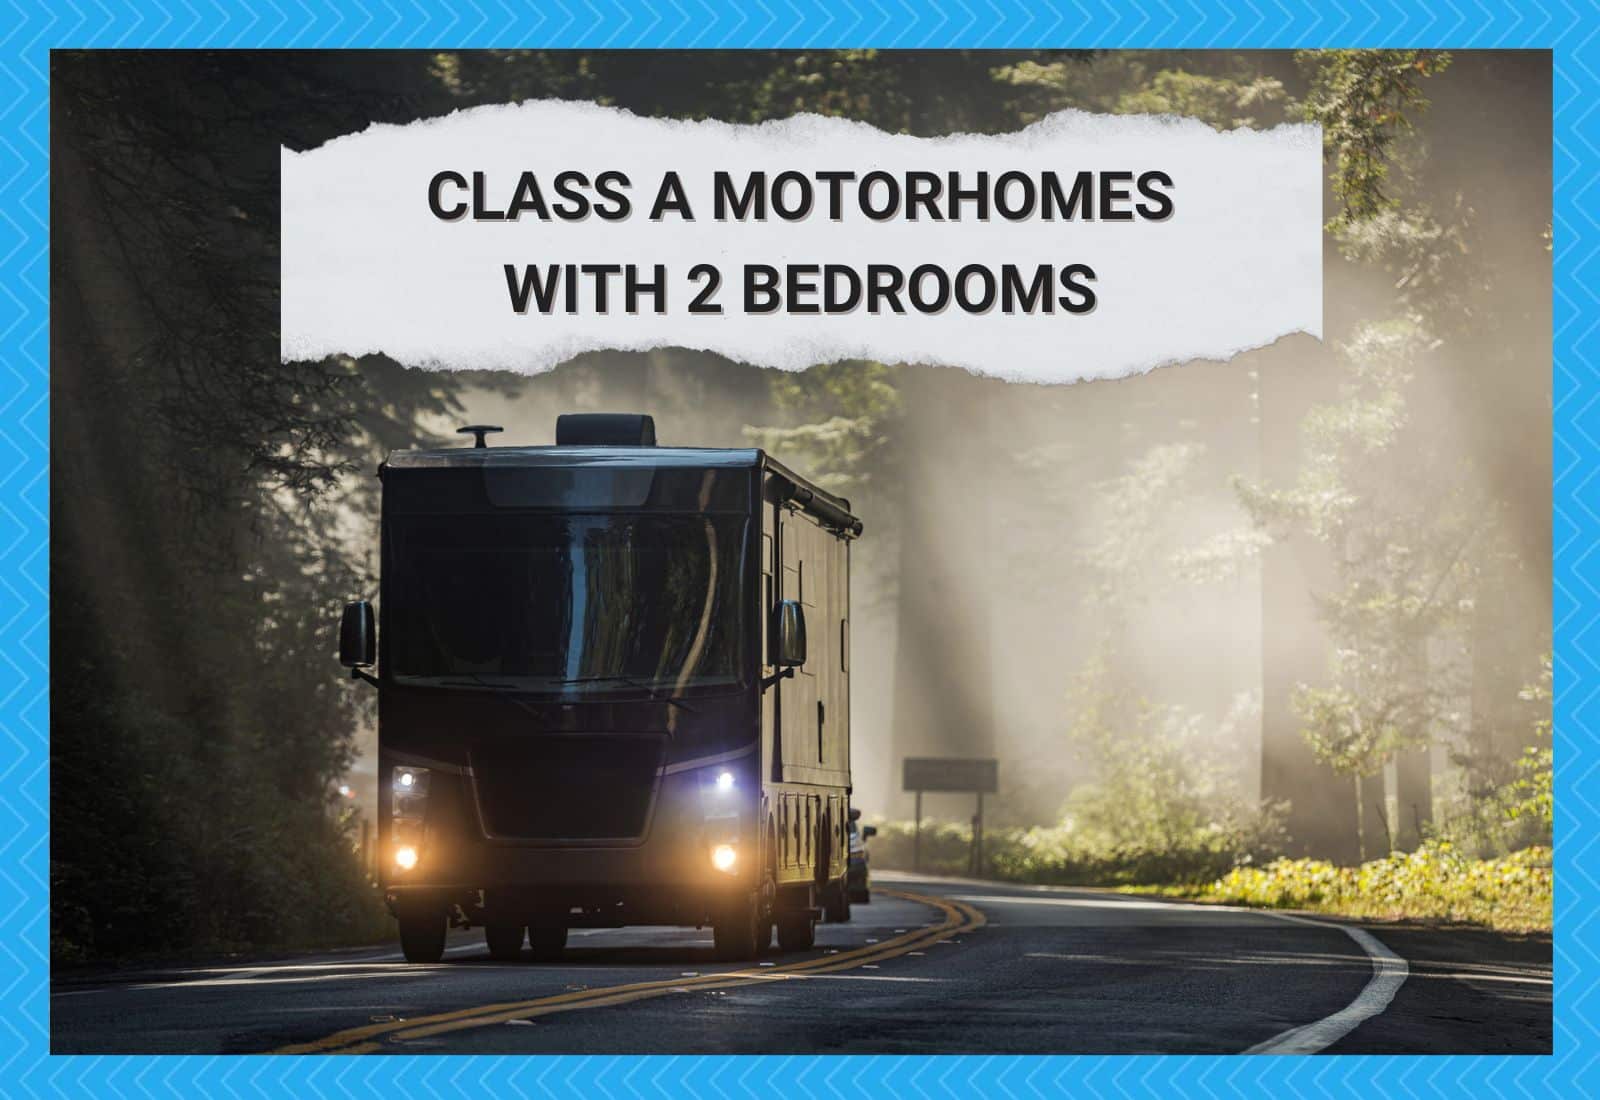 Class A Motorhomes With 2 Bedrooms